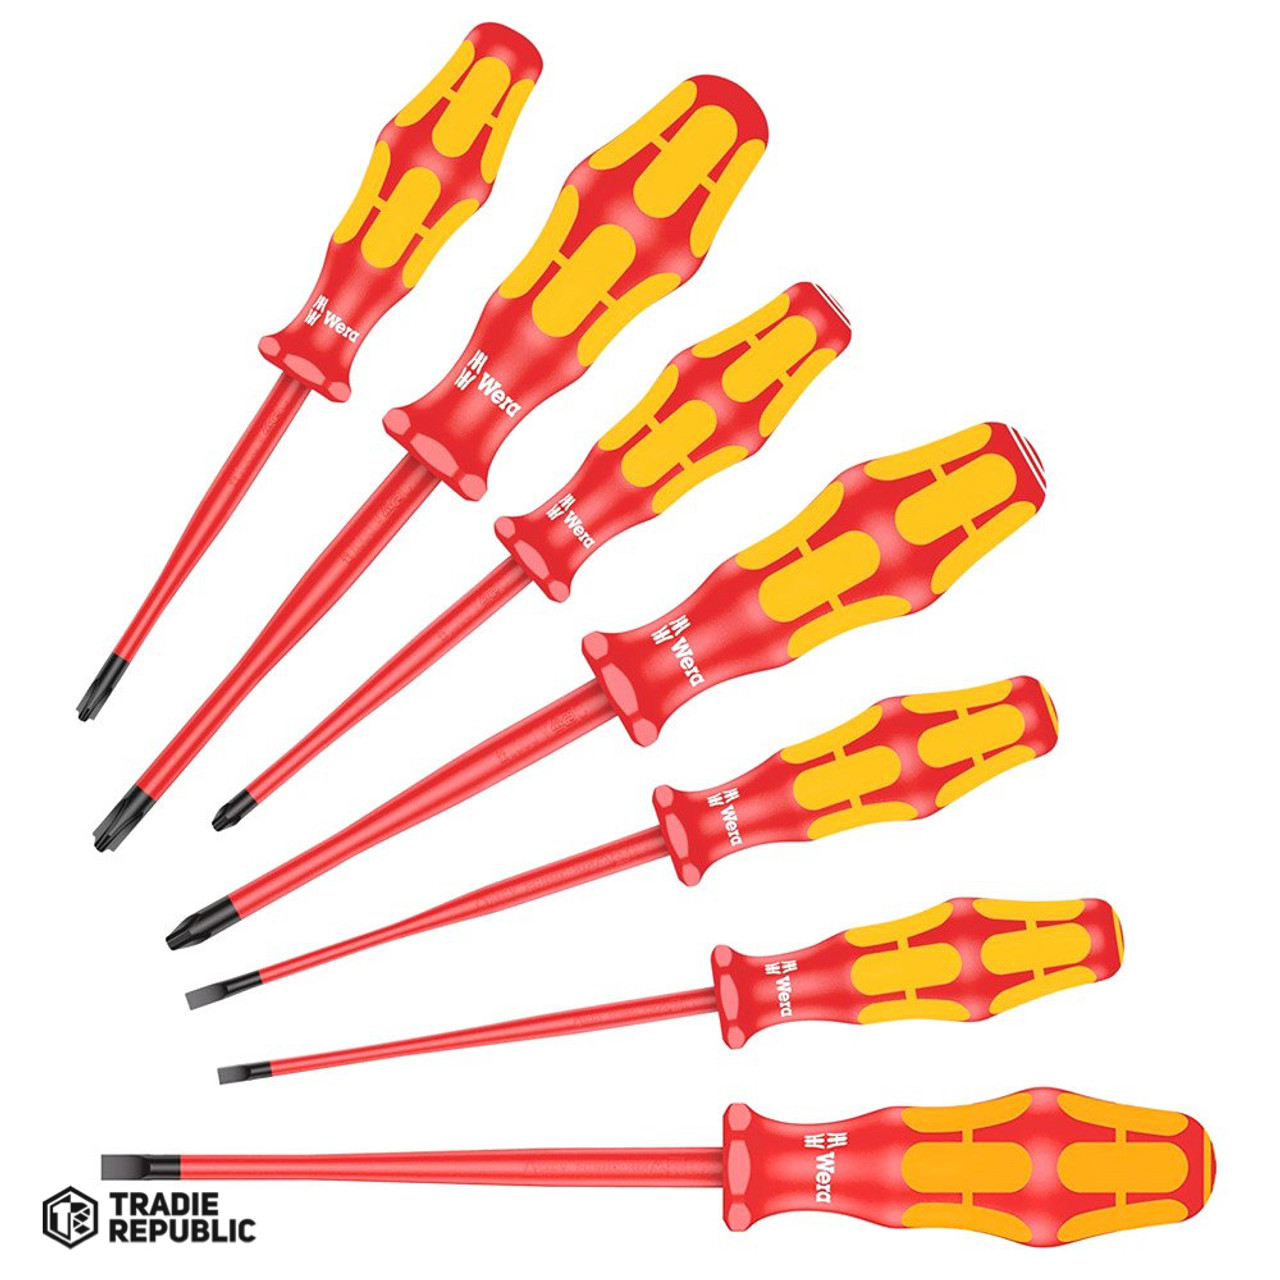 160ISS7 Wera VDE 7piece screwdriver set for Electricians